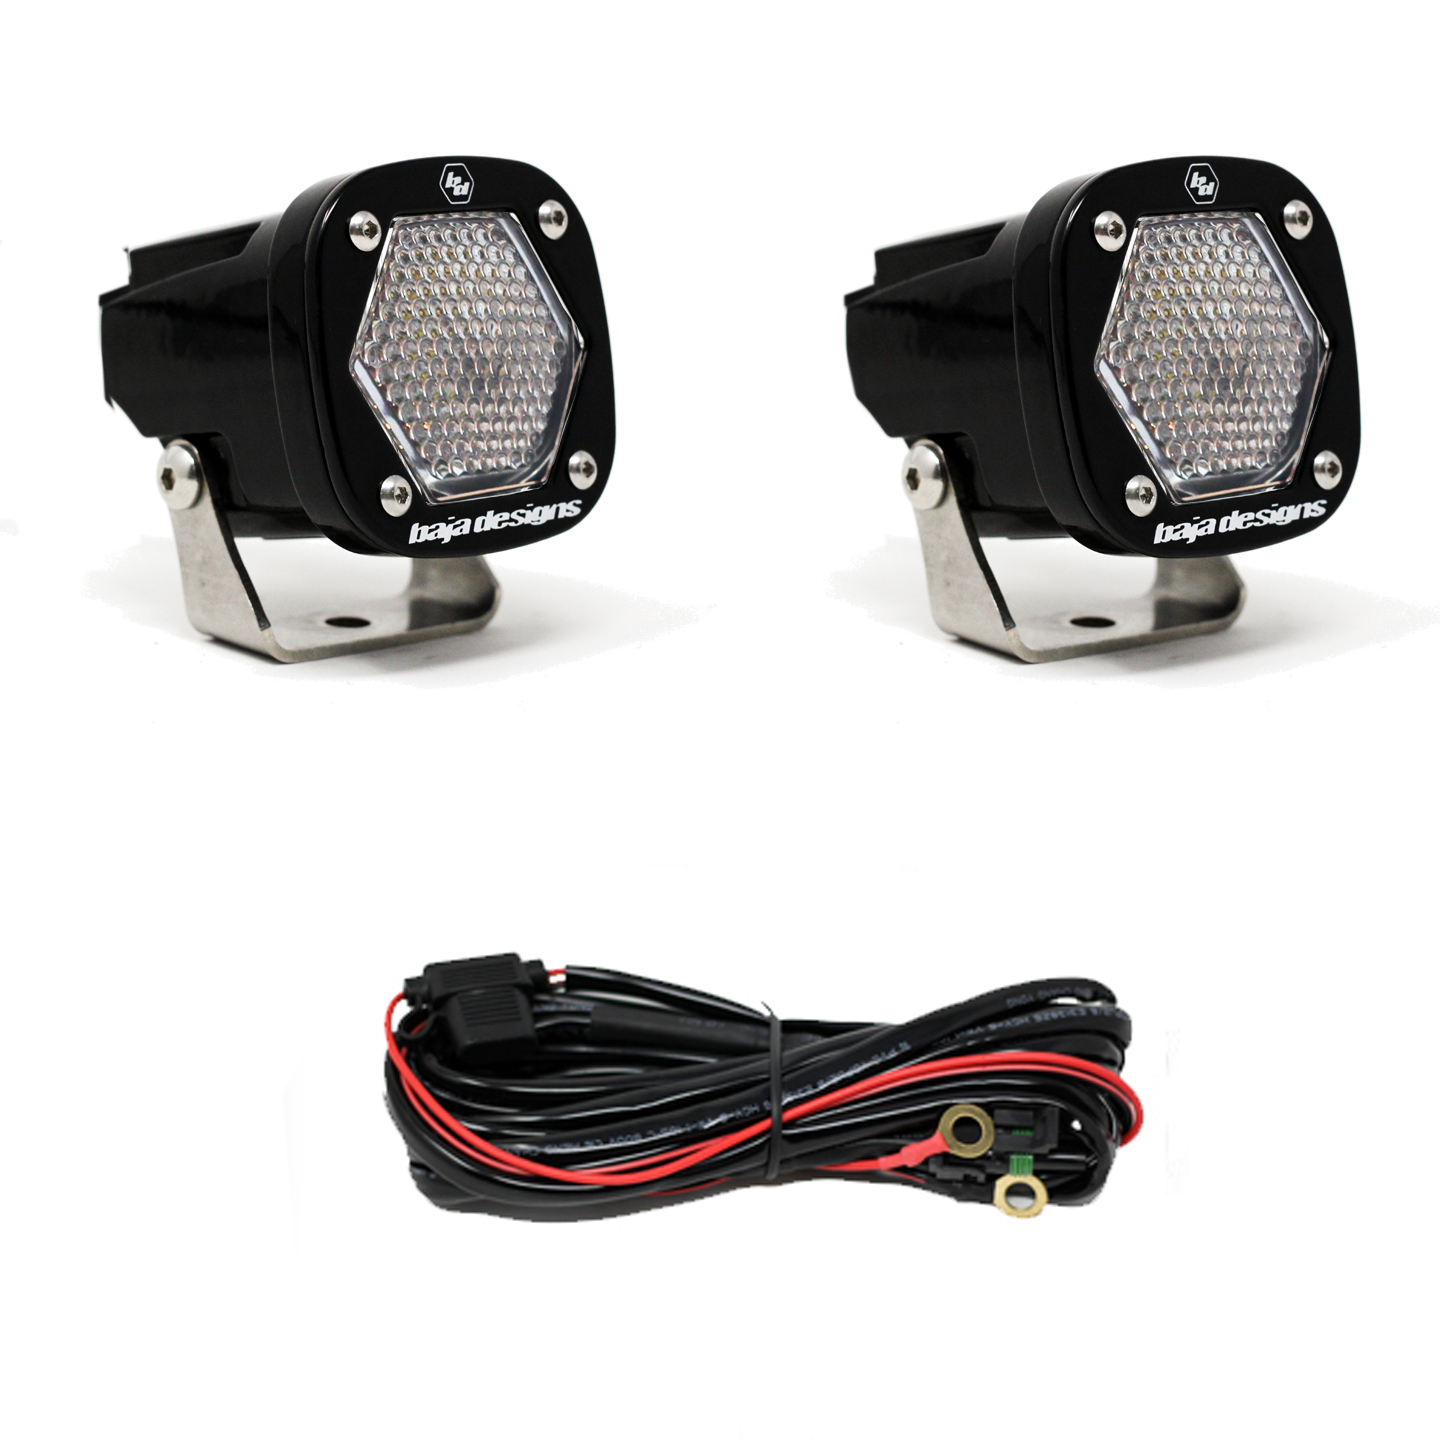 S1 Work/Scene LED Light with Mounting Bracket Pair Baja Designs - Click Image to Close